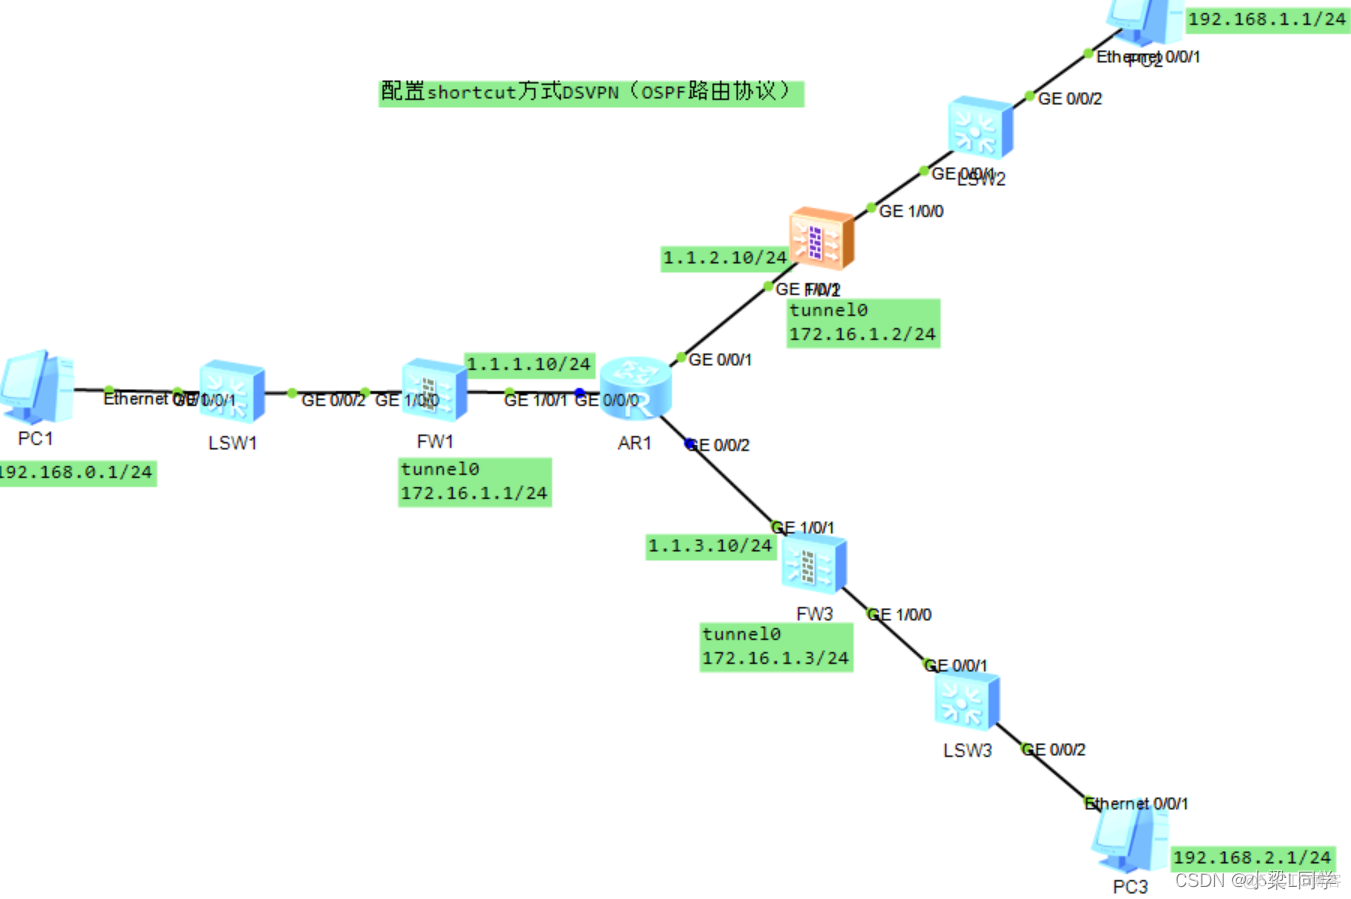 HCIE-Security Day25：DSPN+NHRP+Mgre：实验(四）配置shortcut方式DSPN（OSPF路由协议）_组播